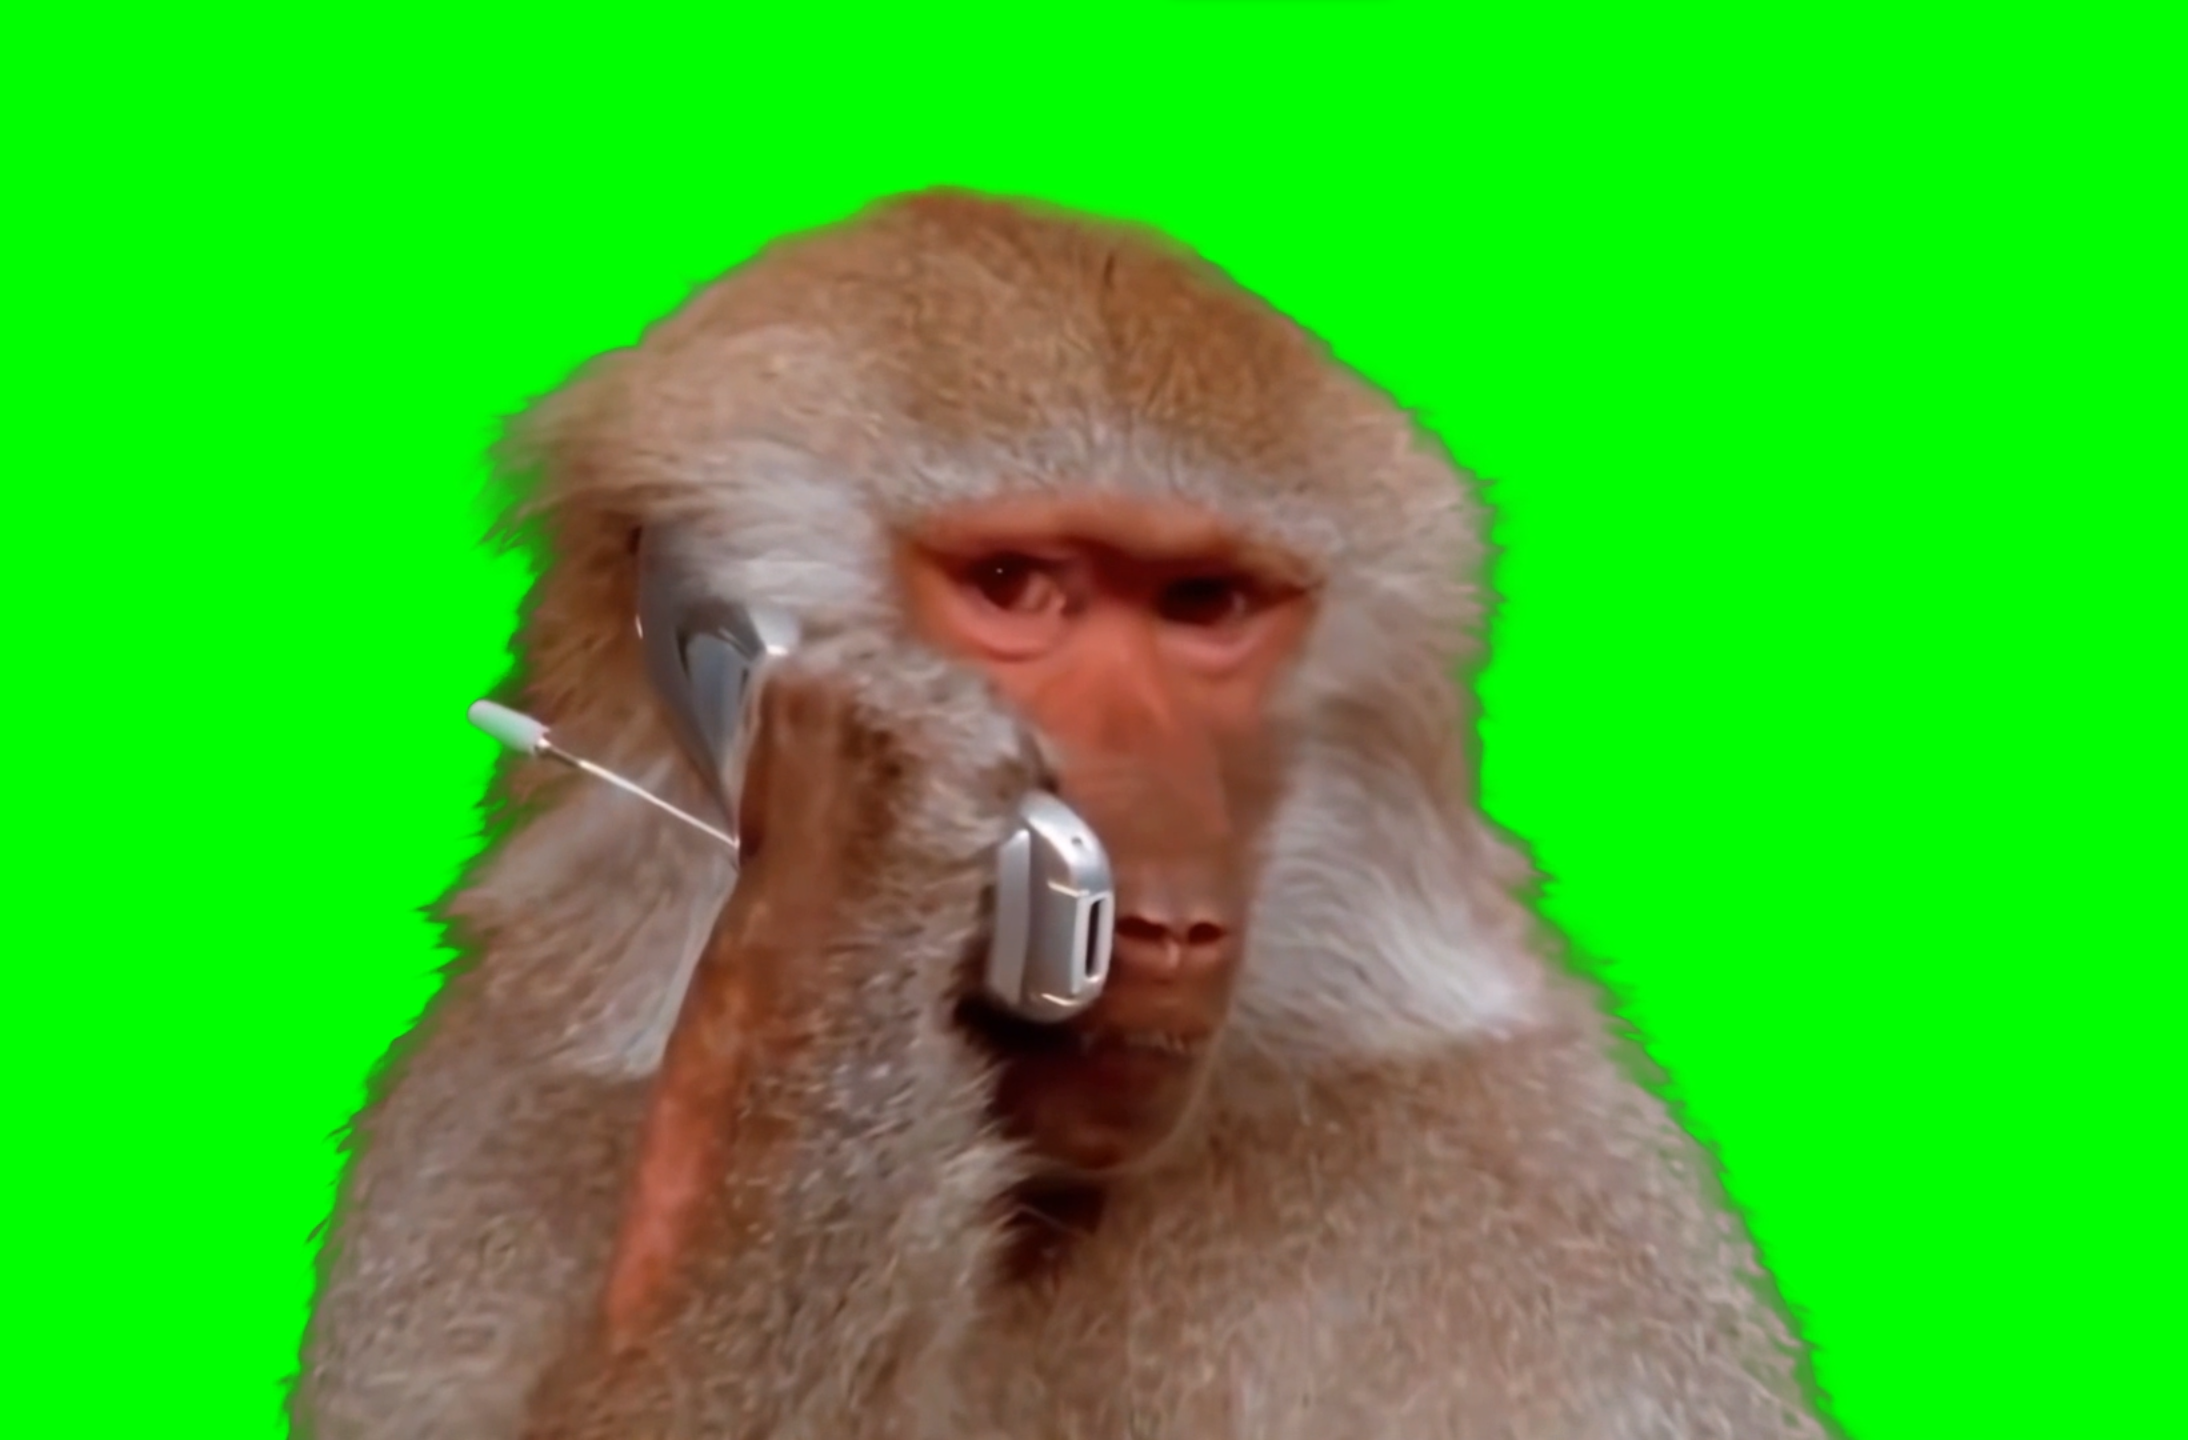 Monkey with hand out - video template by CapCut